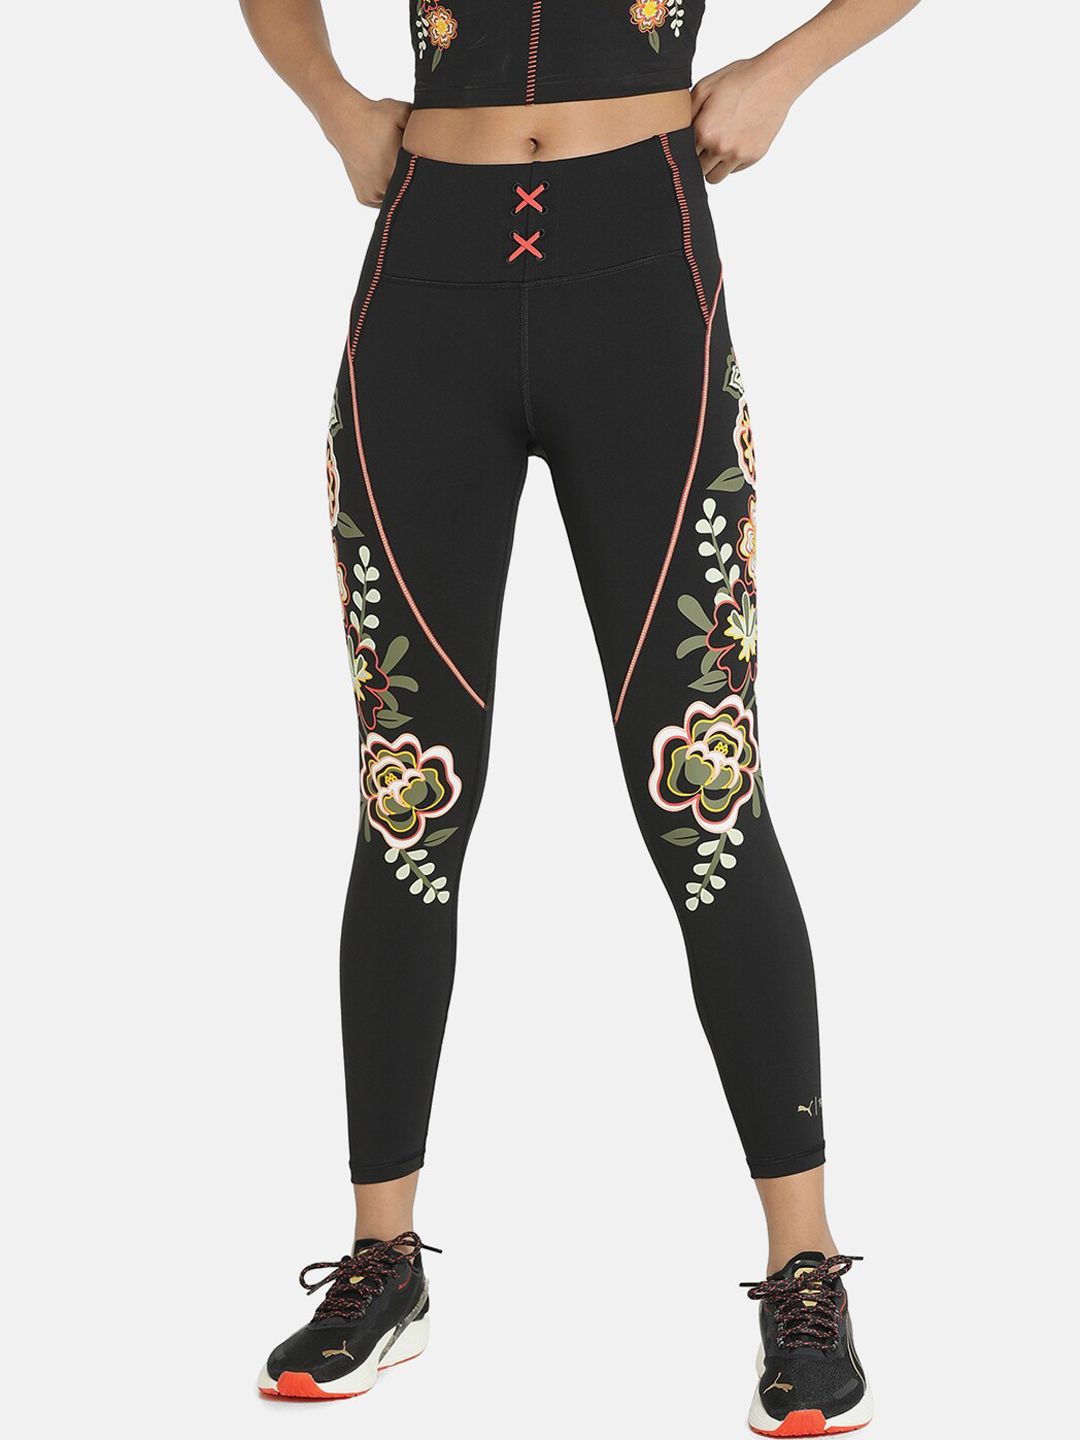 Puma Woman Black Floral Print Tights Price in India